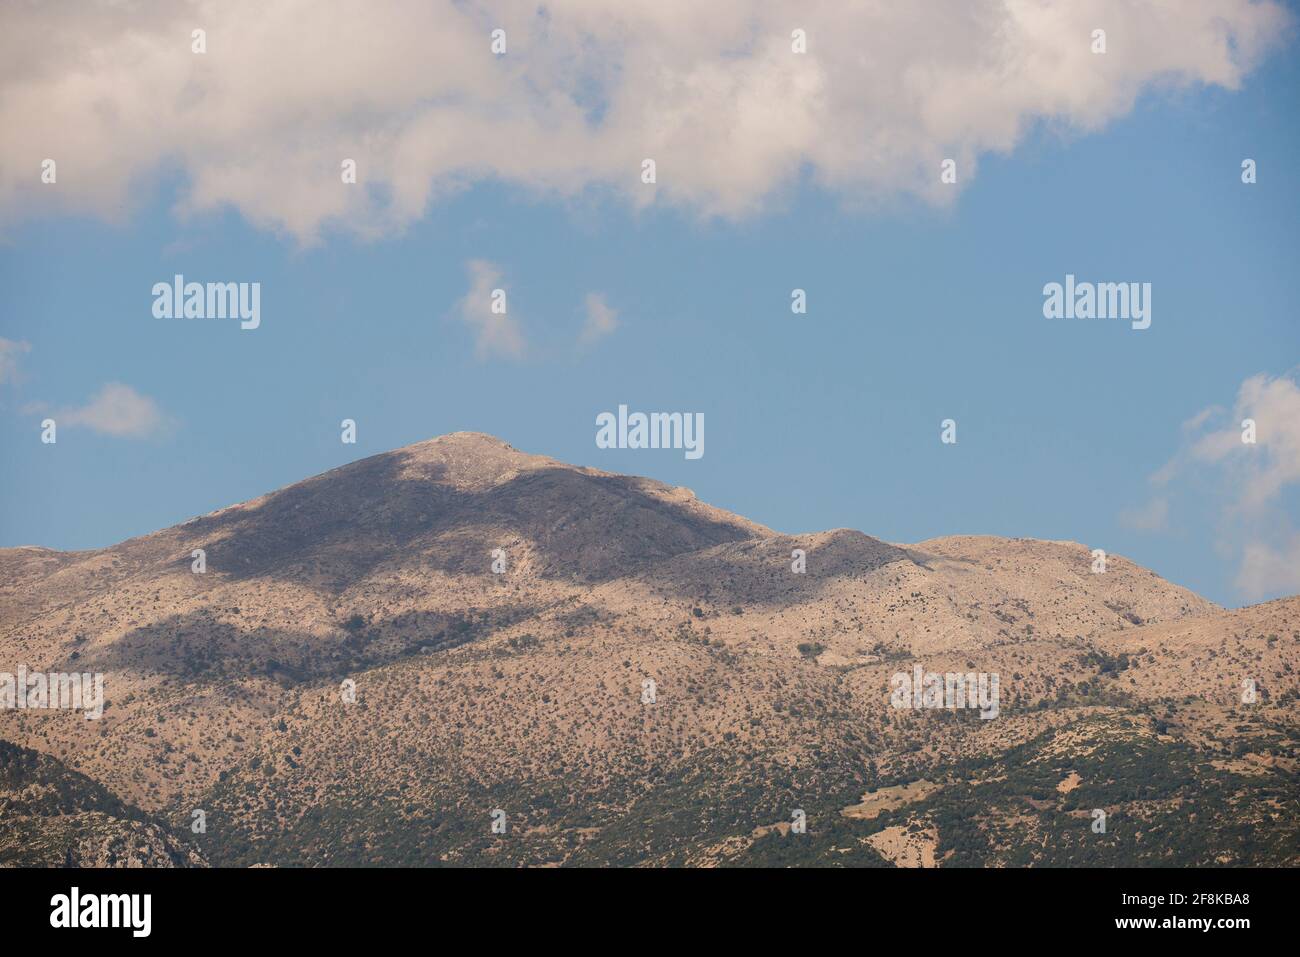 View on a typical mountain in Peloponnese, South-Greece, with a cloud above Stock Photo